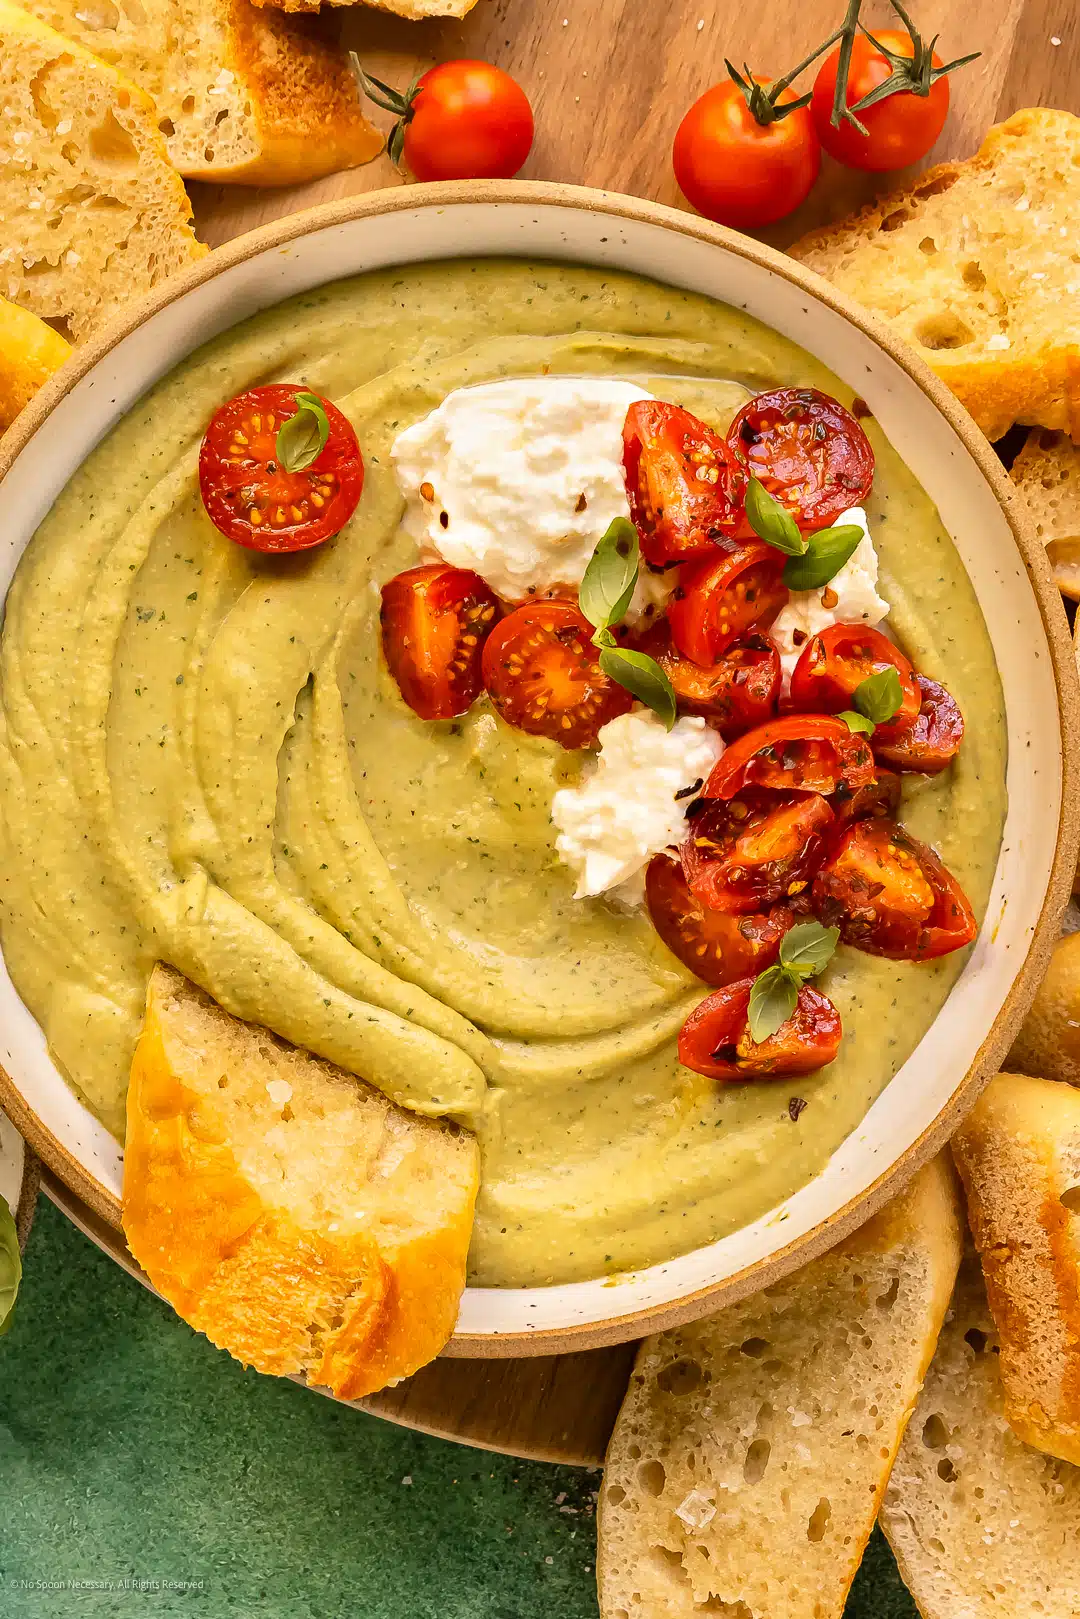 Overhead photo of a piece of toast dipped into a bowl of hummus made with fresh herbs.